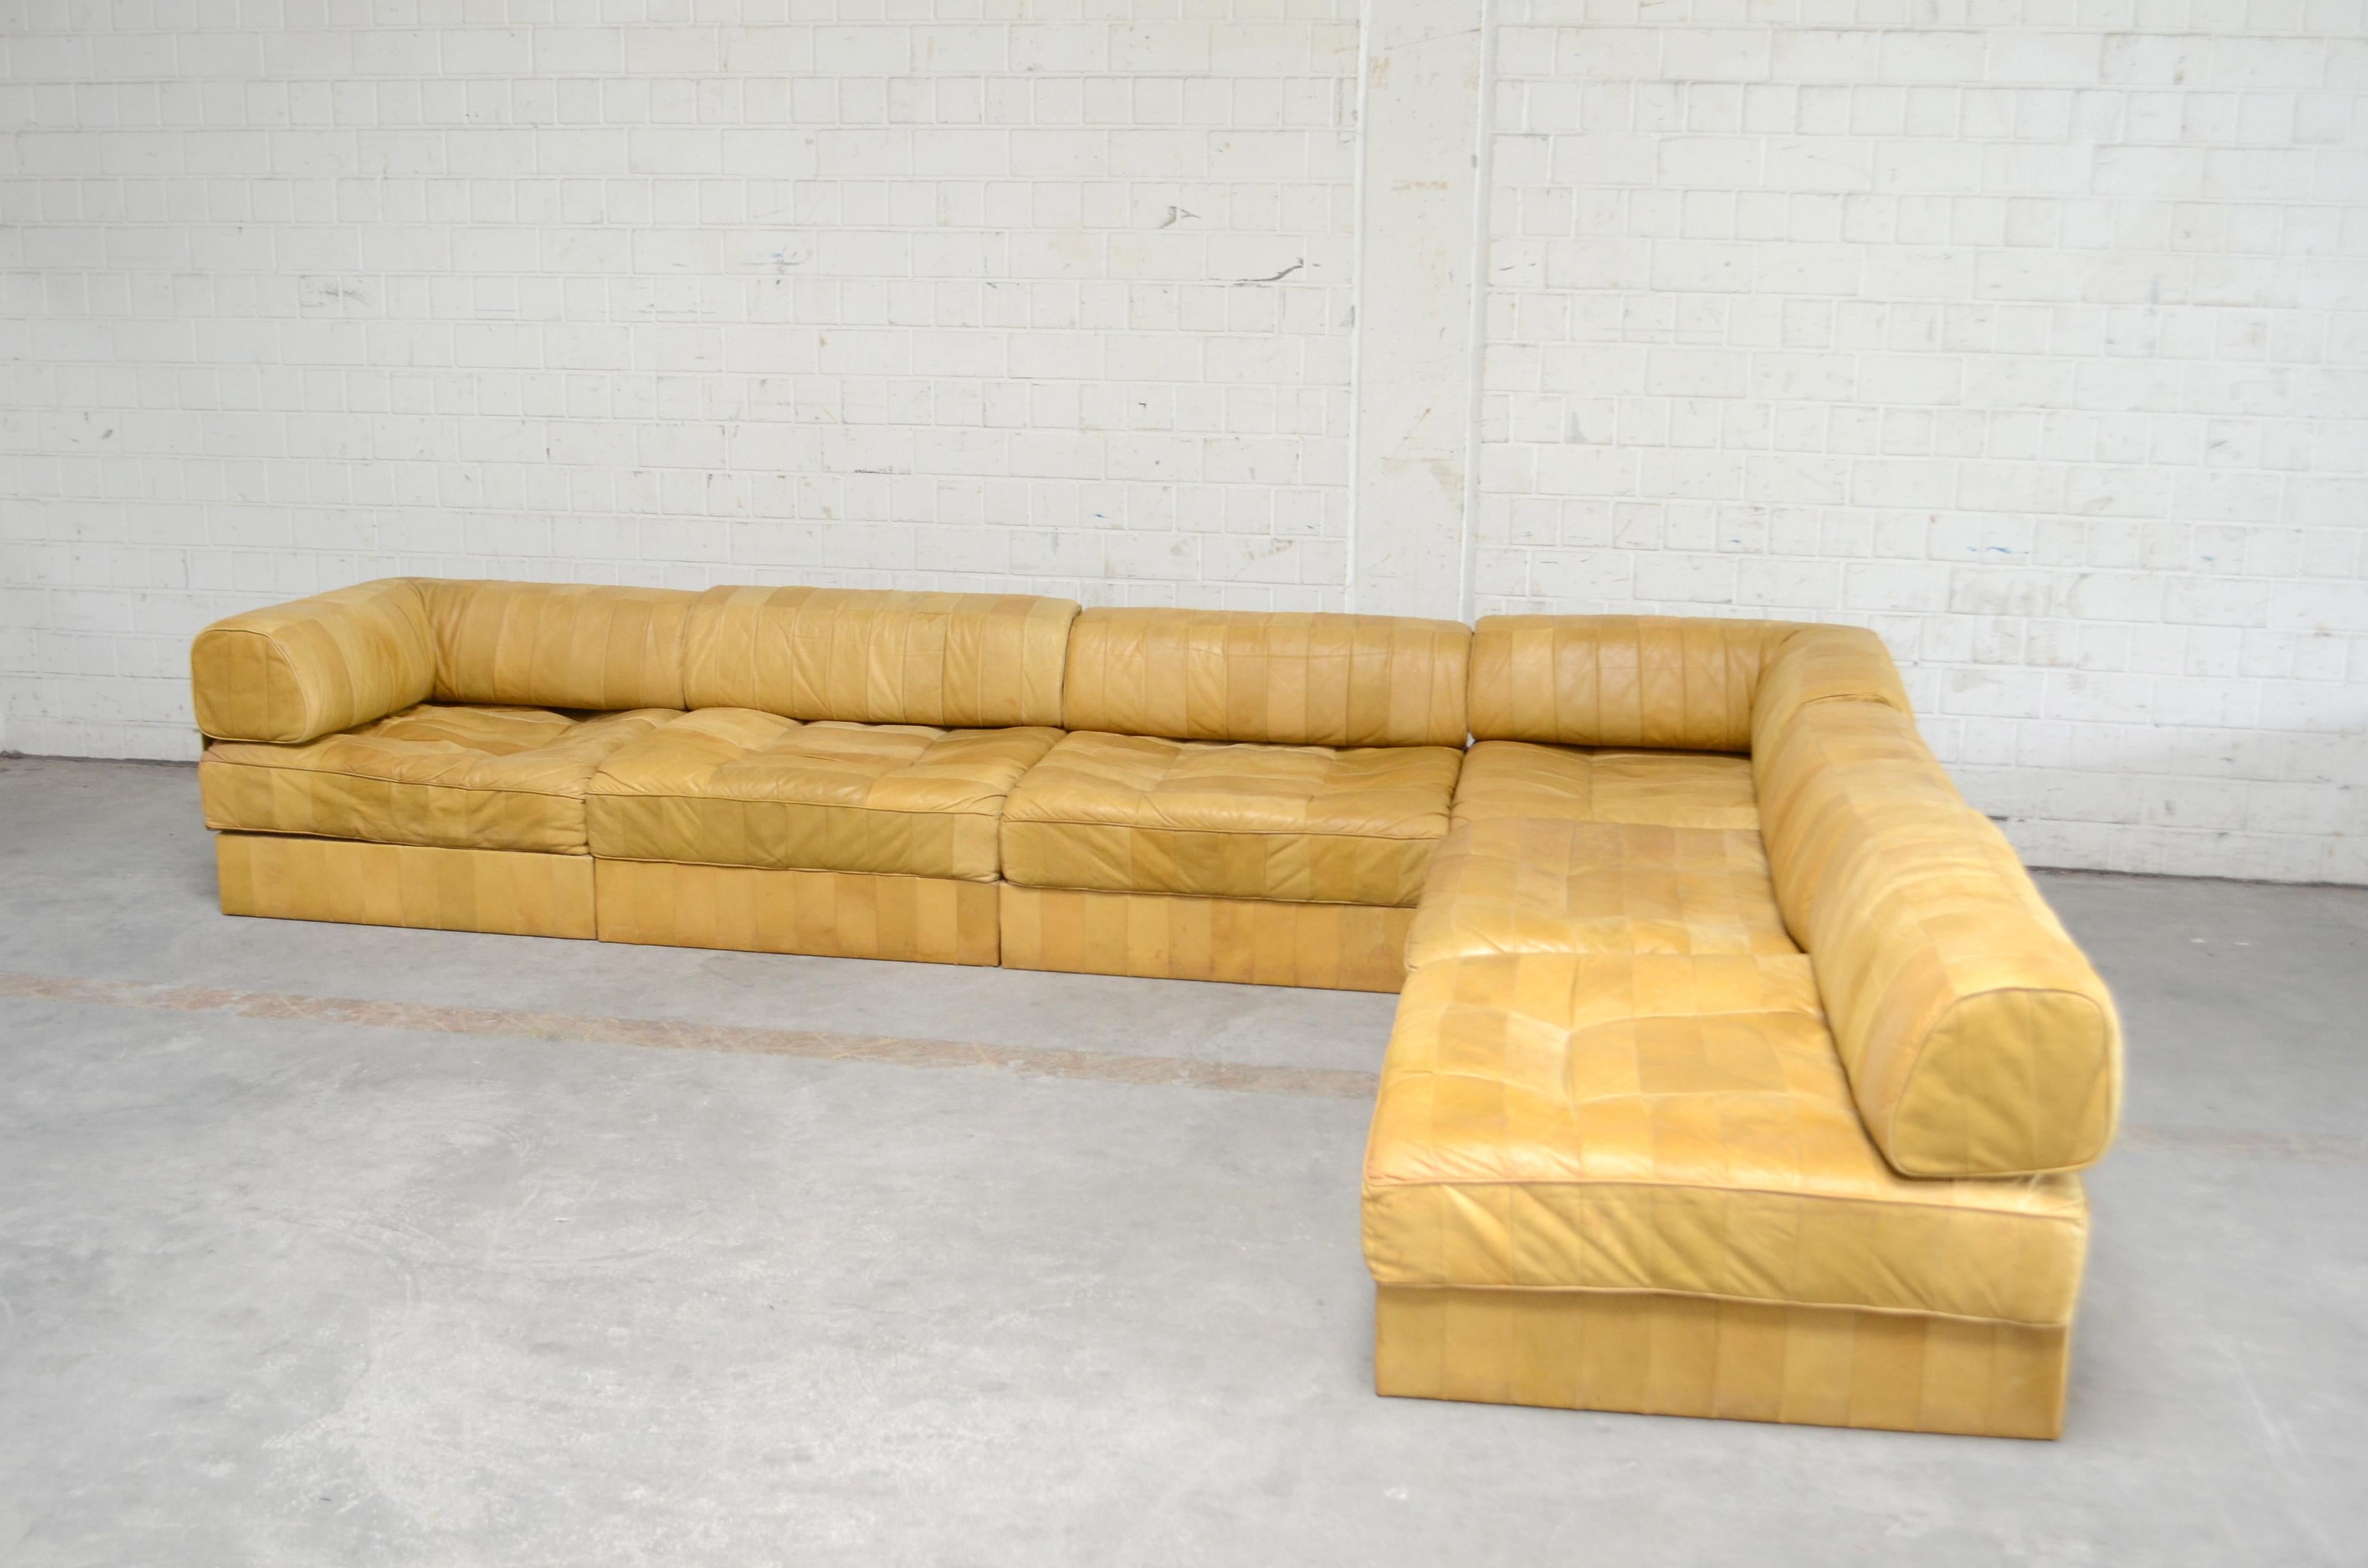 De Sede Ds 88 Modular Leather Sofa in patchwork design.
Yellow cognac aniline leather in great vintage condition.The sofa is convertible in different variations of seating.
It consist 6 sectional seating elements includes
6 Bases, 8 Magazine